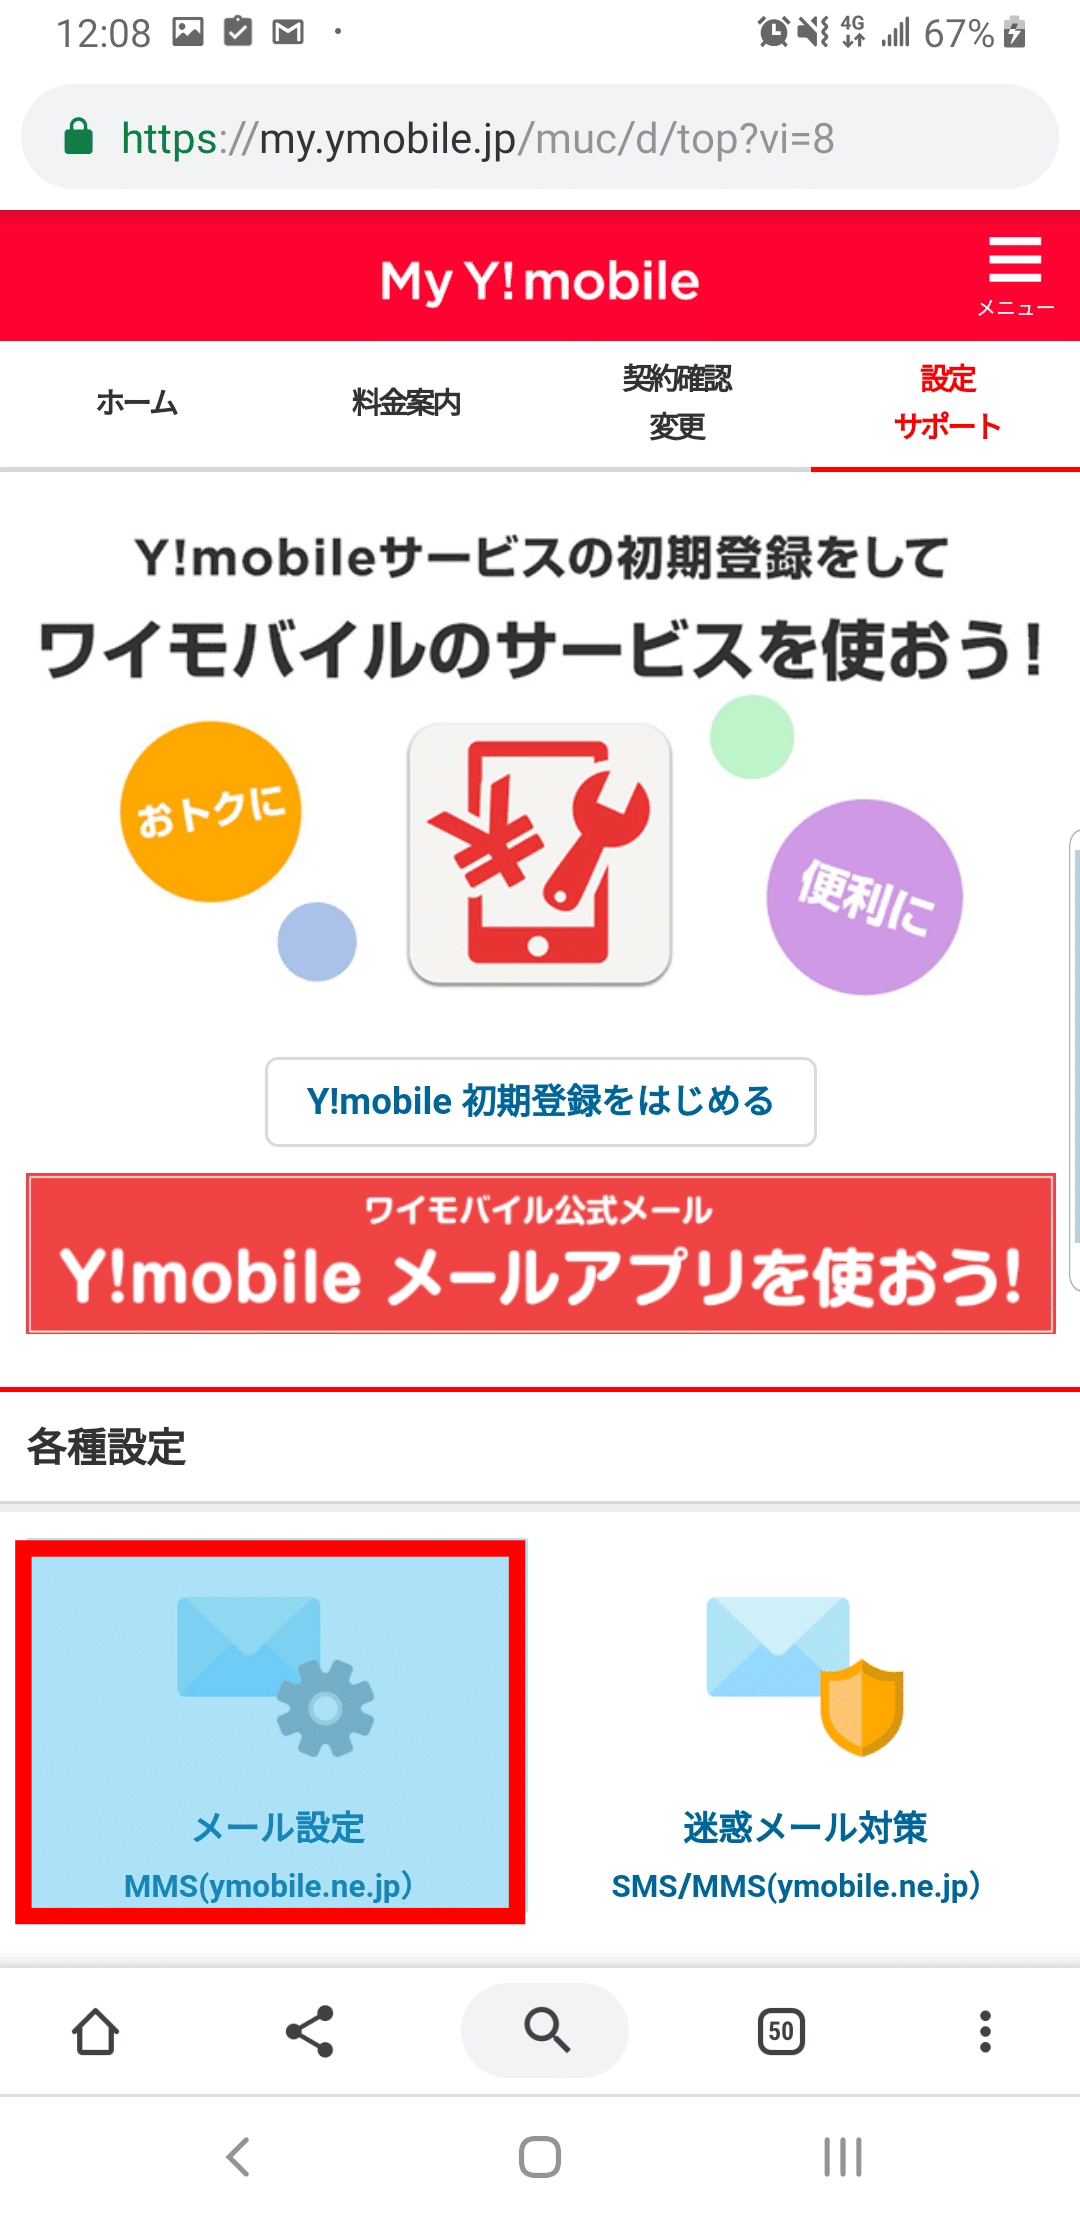 Mobile my y